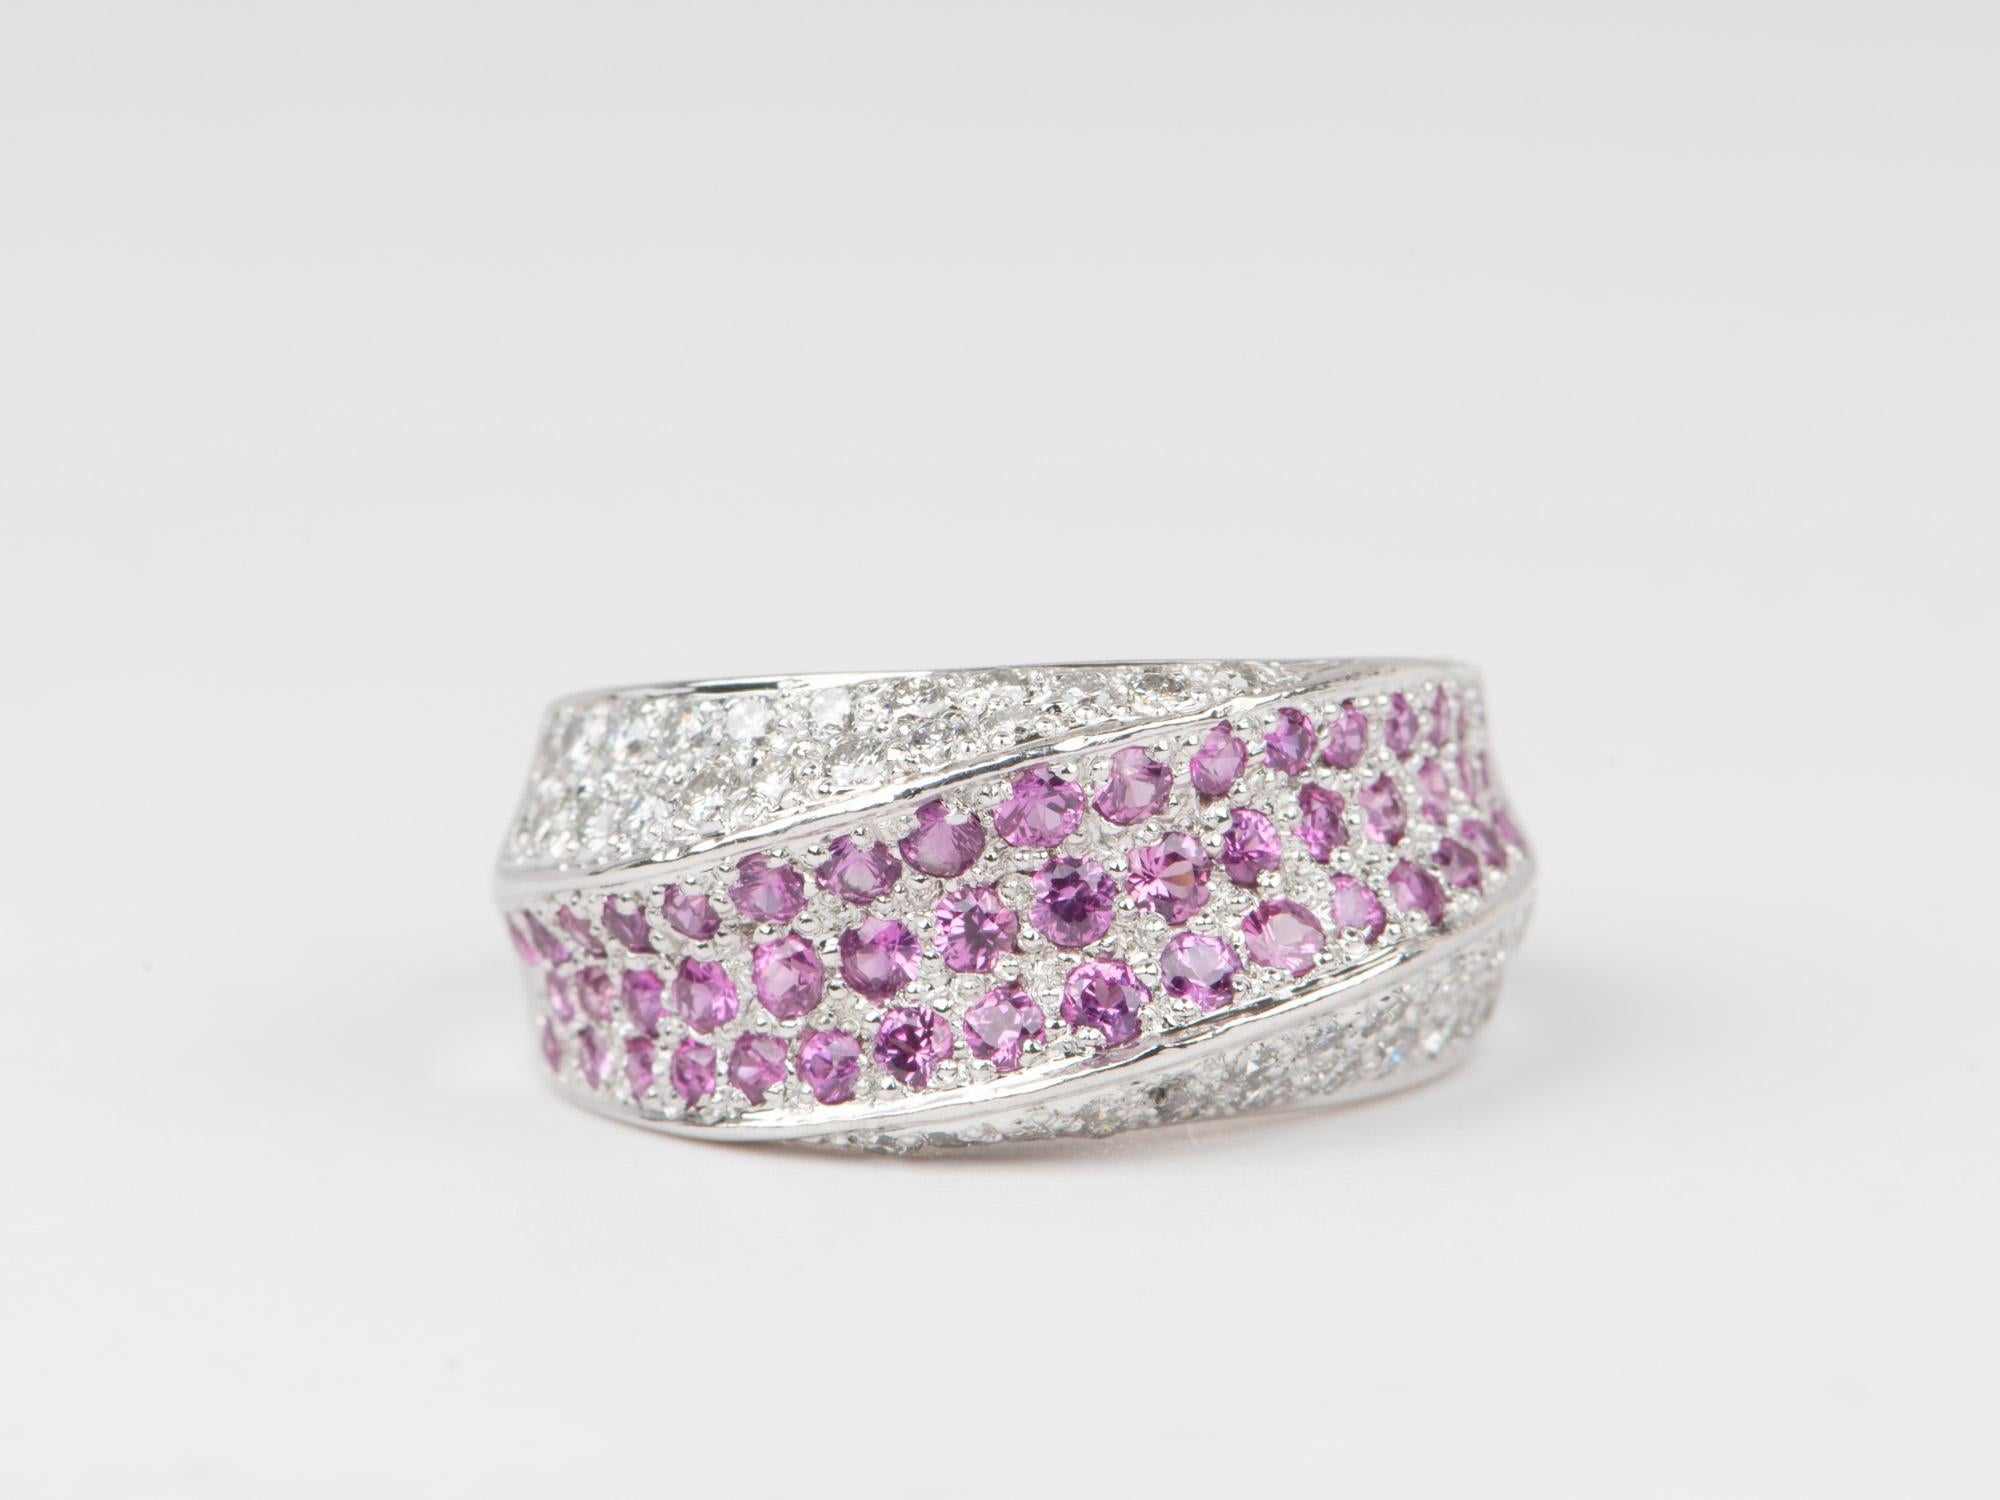 ♥ Dual Tone Three Dimensional Diamond and Pink Sapphire Pave Wide Band Ring 18K Gold PT900 8.1g
♥ The design measures 9.2mm in length (North South direction), 21mm in width (East West direction), and sits 4mm tall from the finger. Band width is